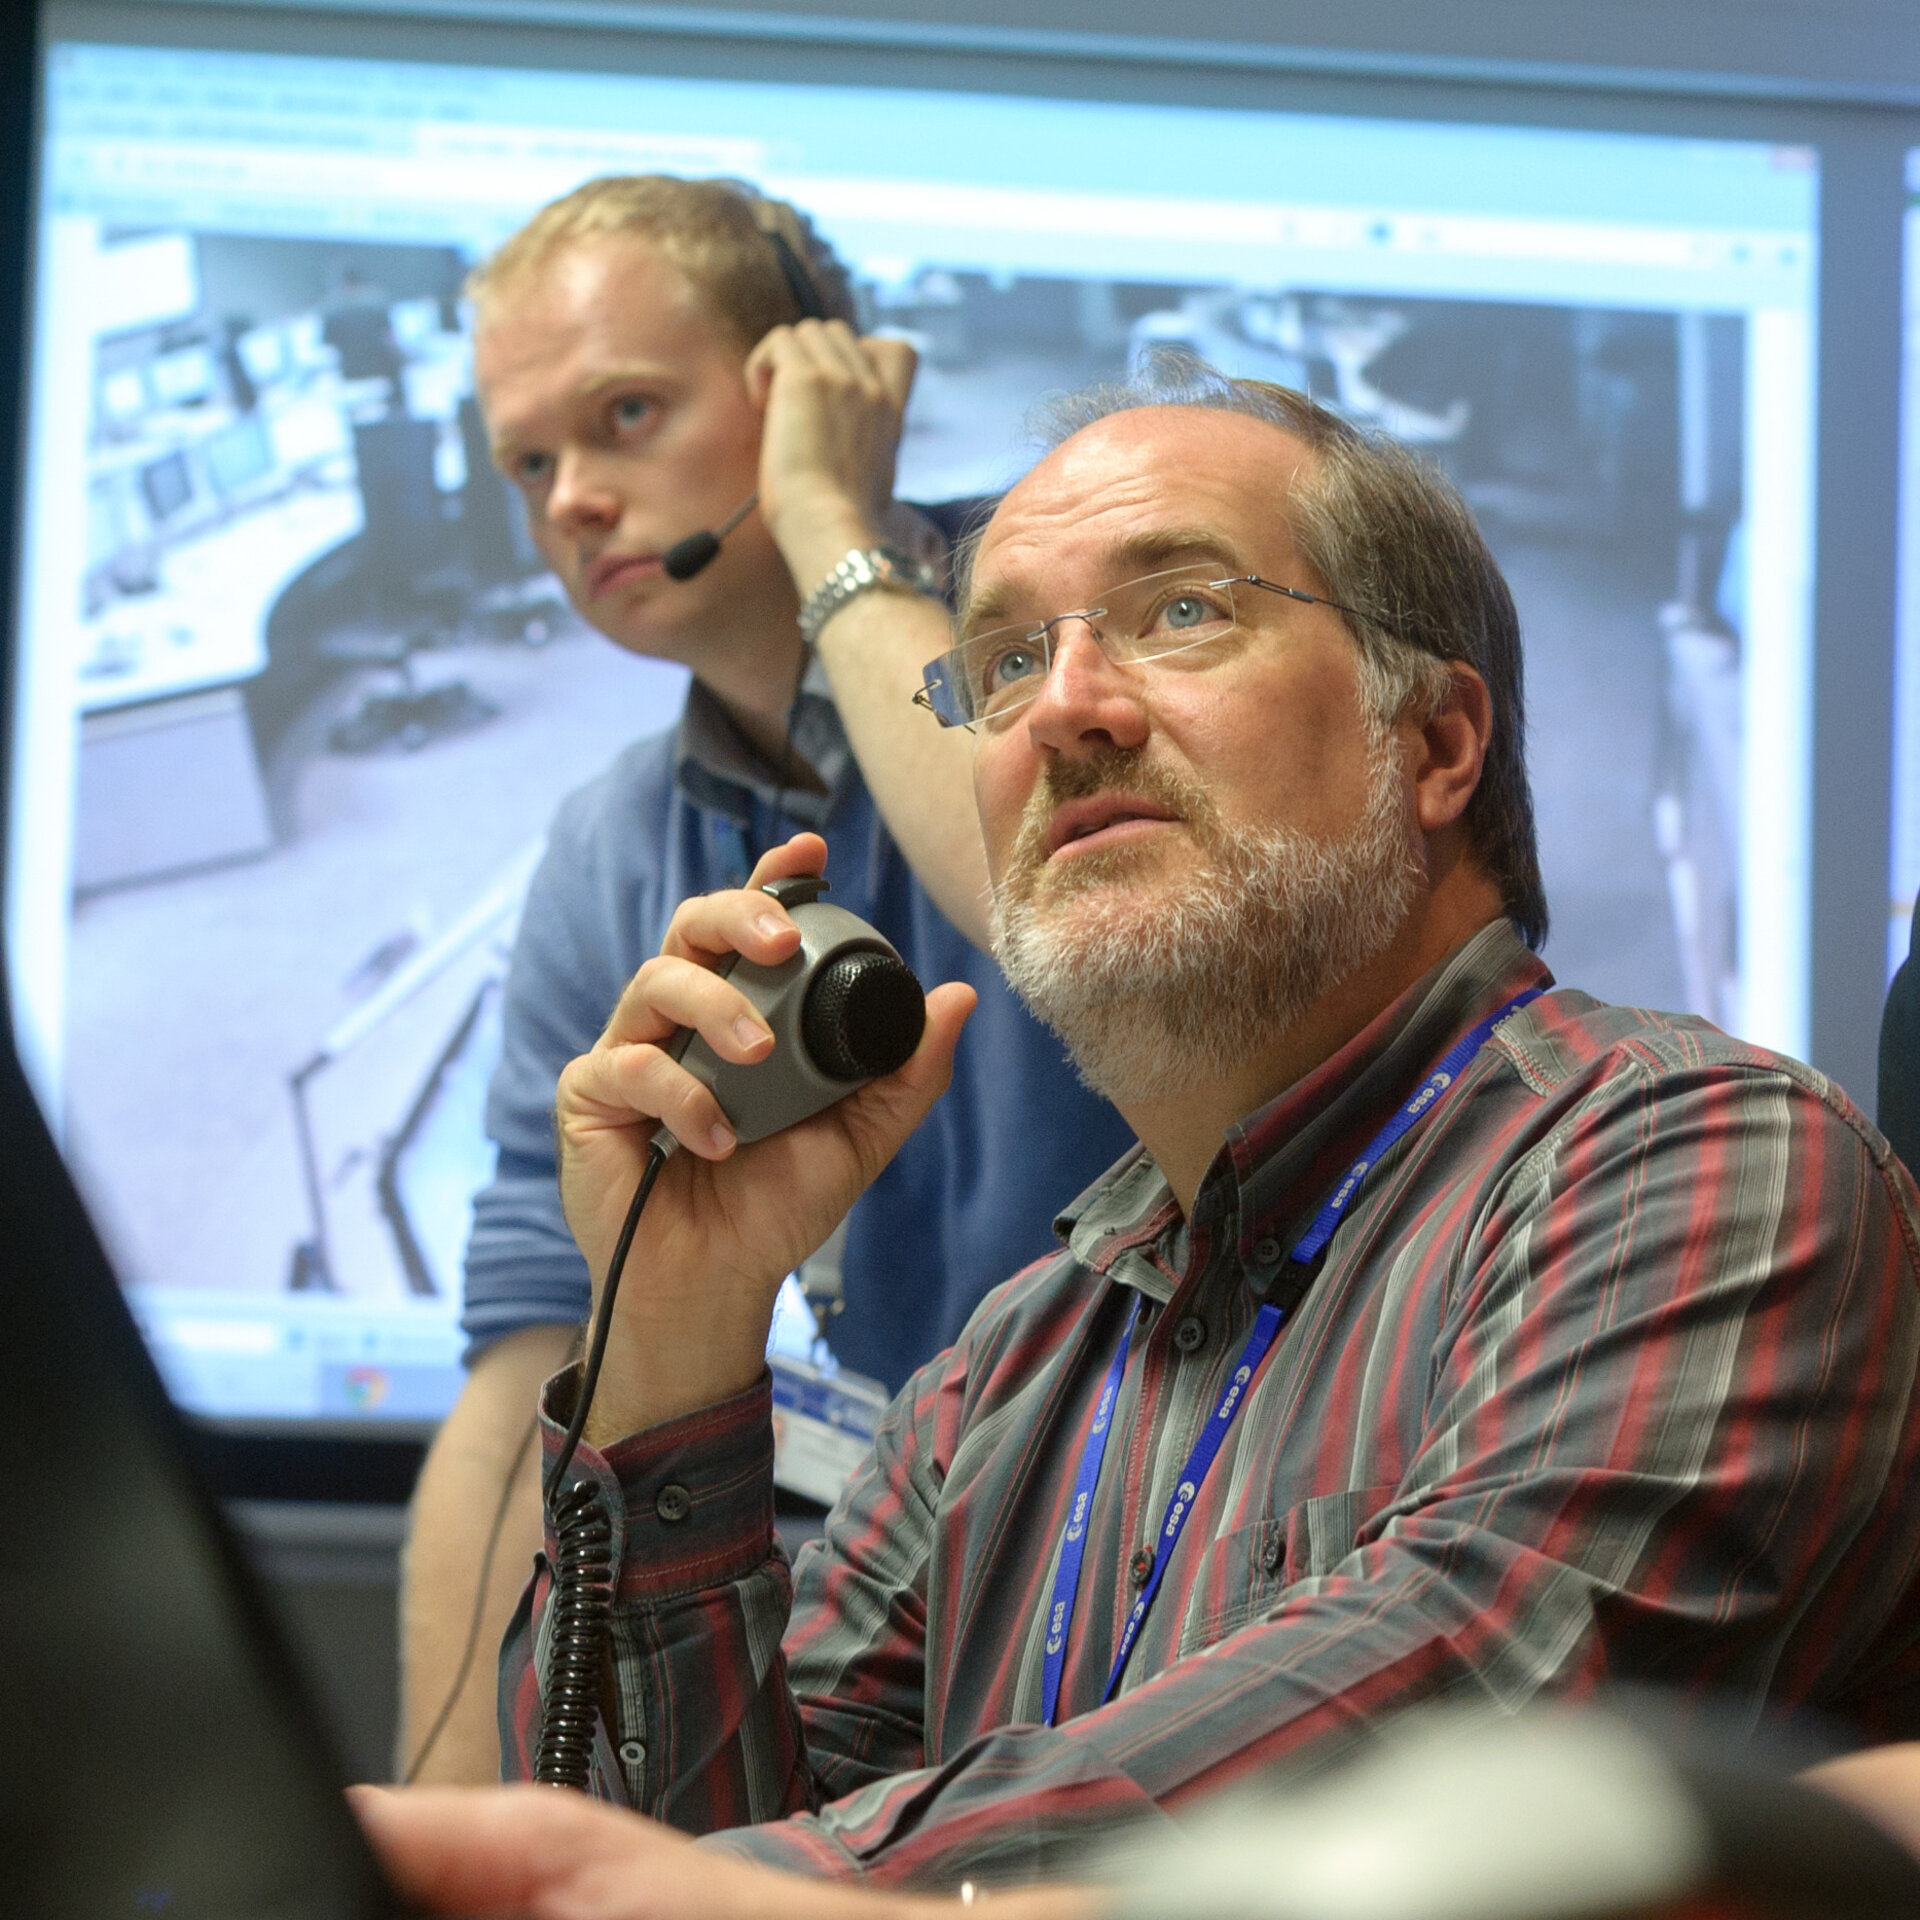 Experts at ESOC provide realistic training for mission control teams